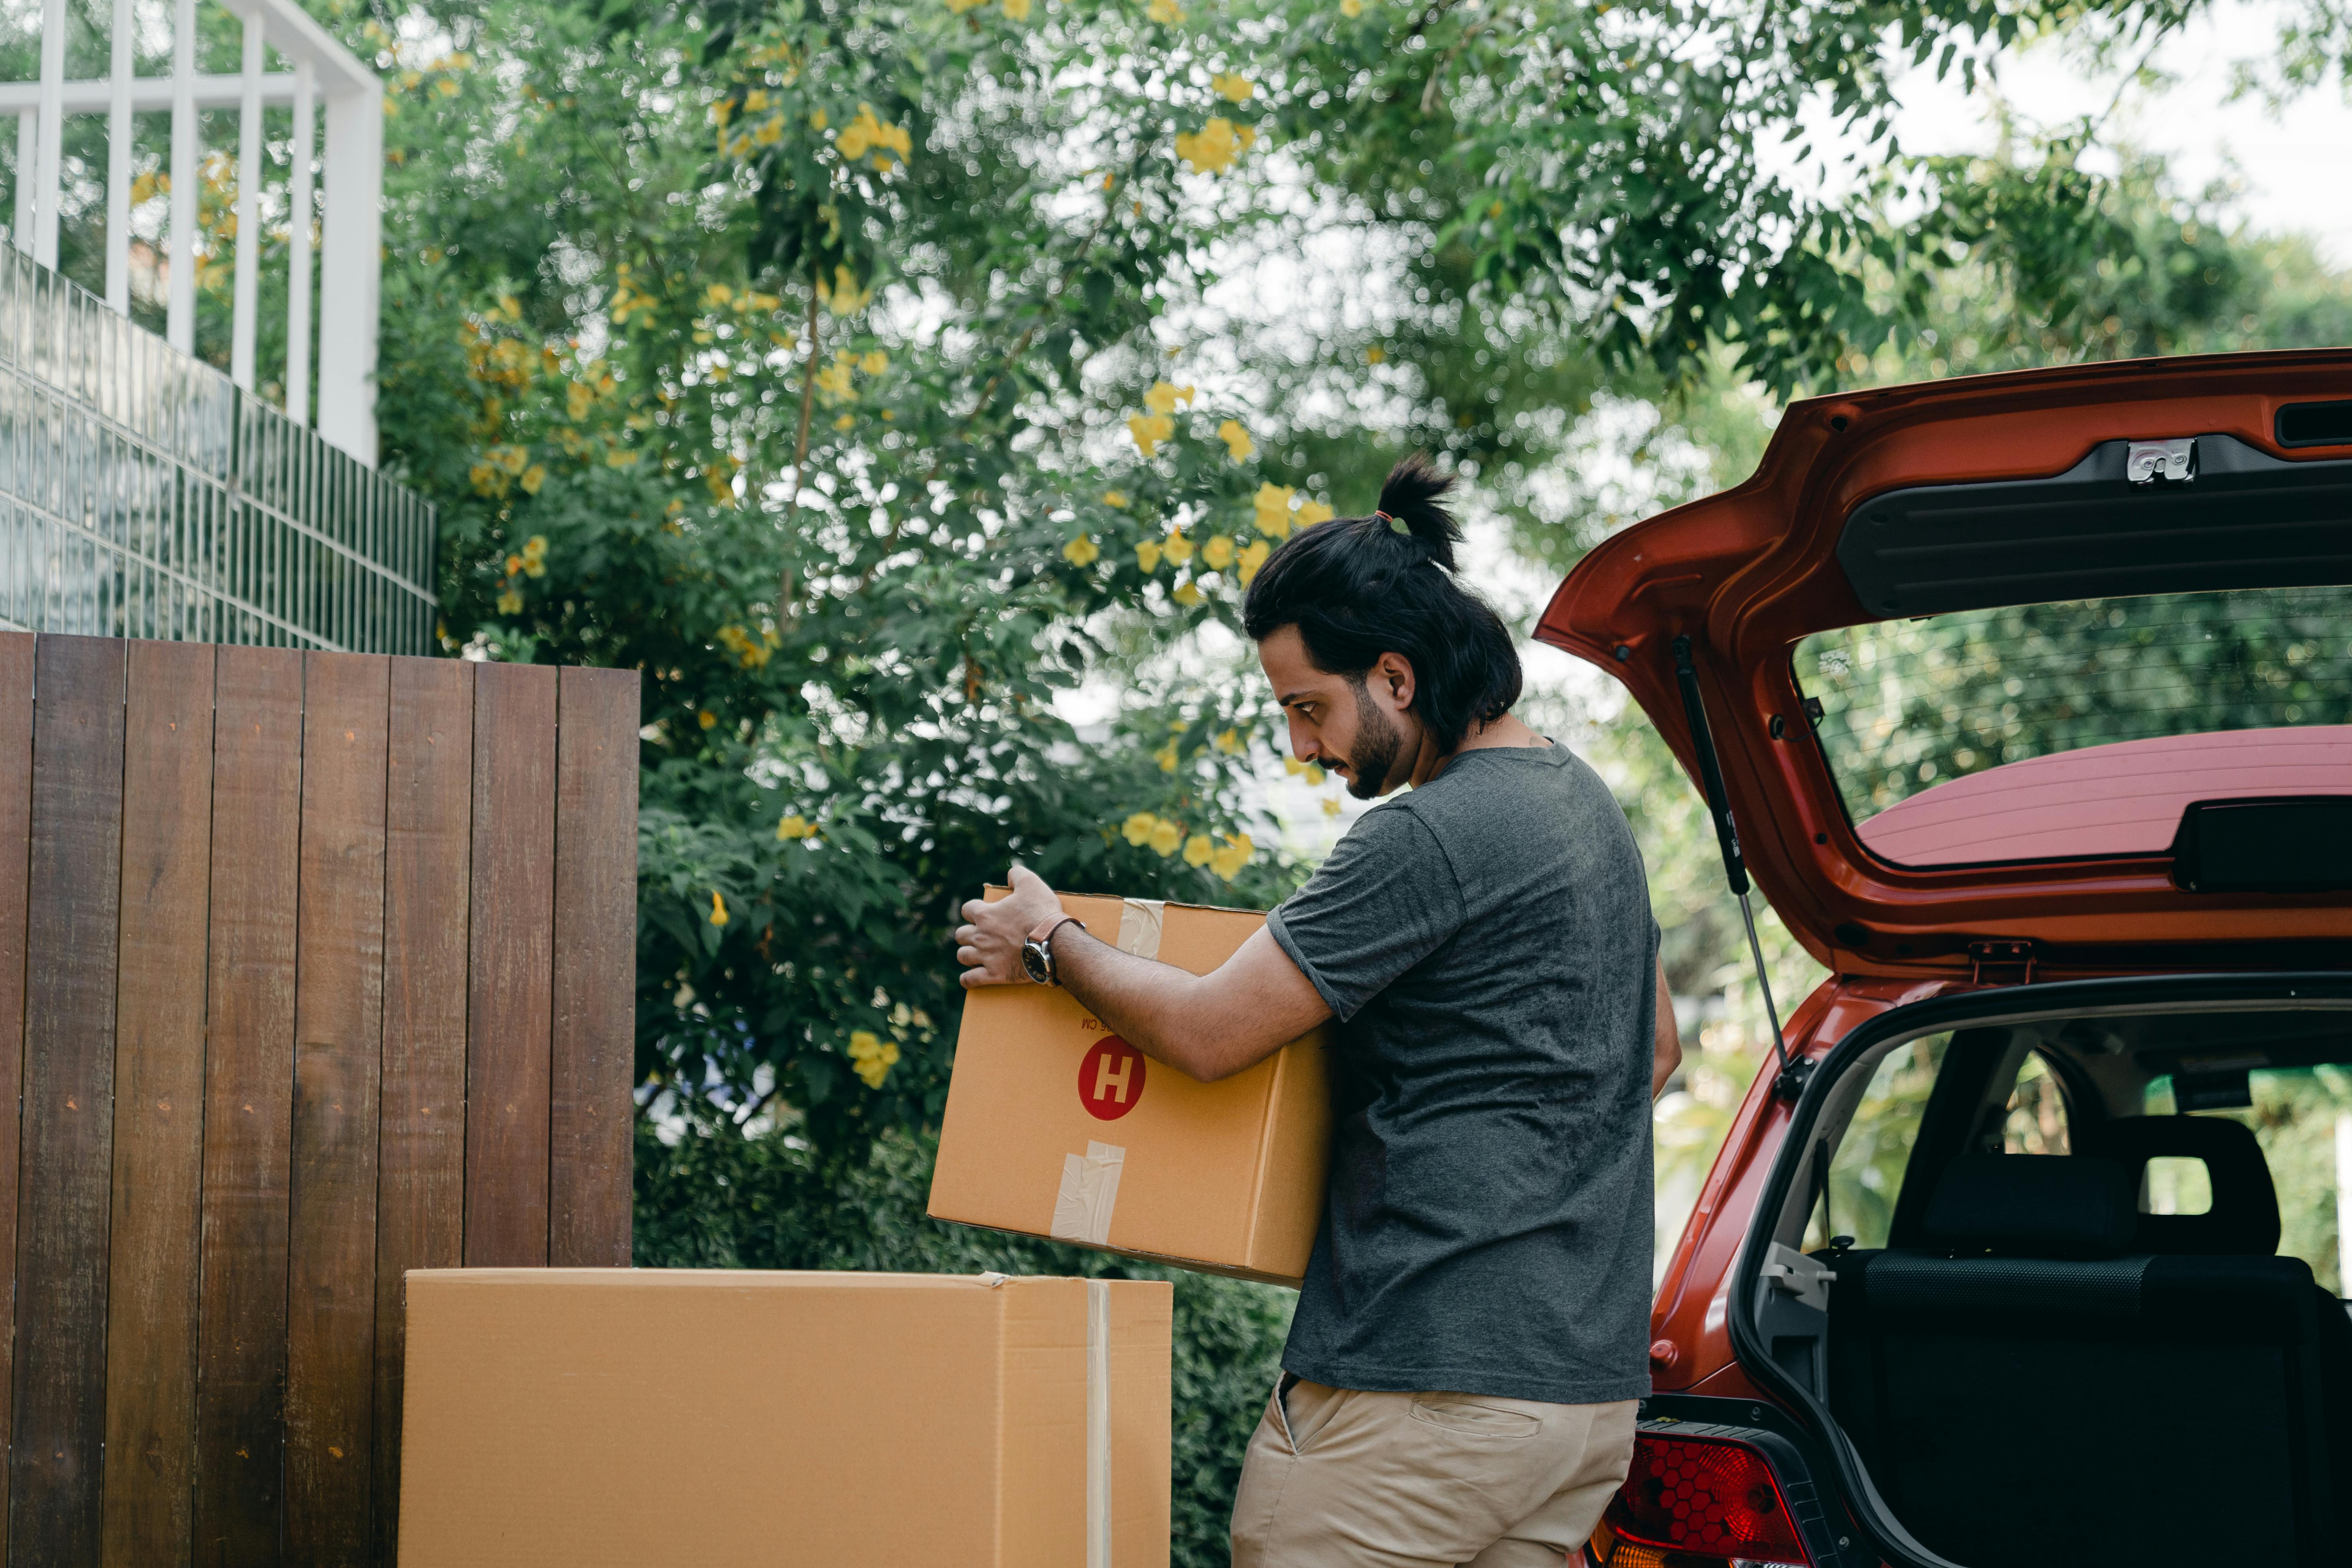 A man packing moving boxes into a car | Source: Pexels